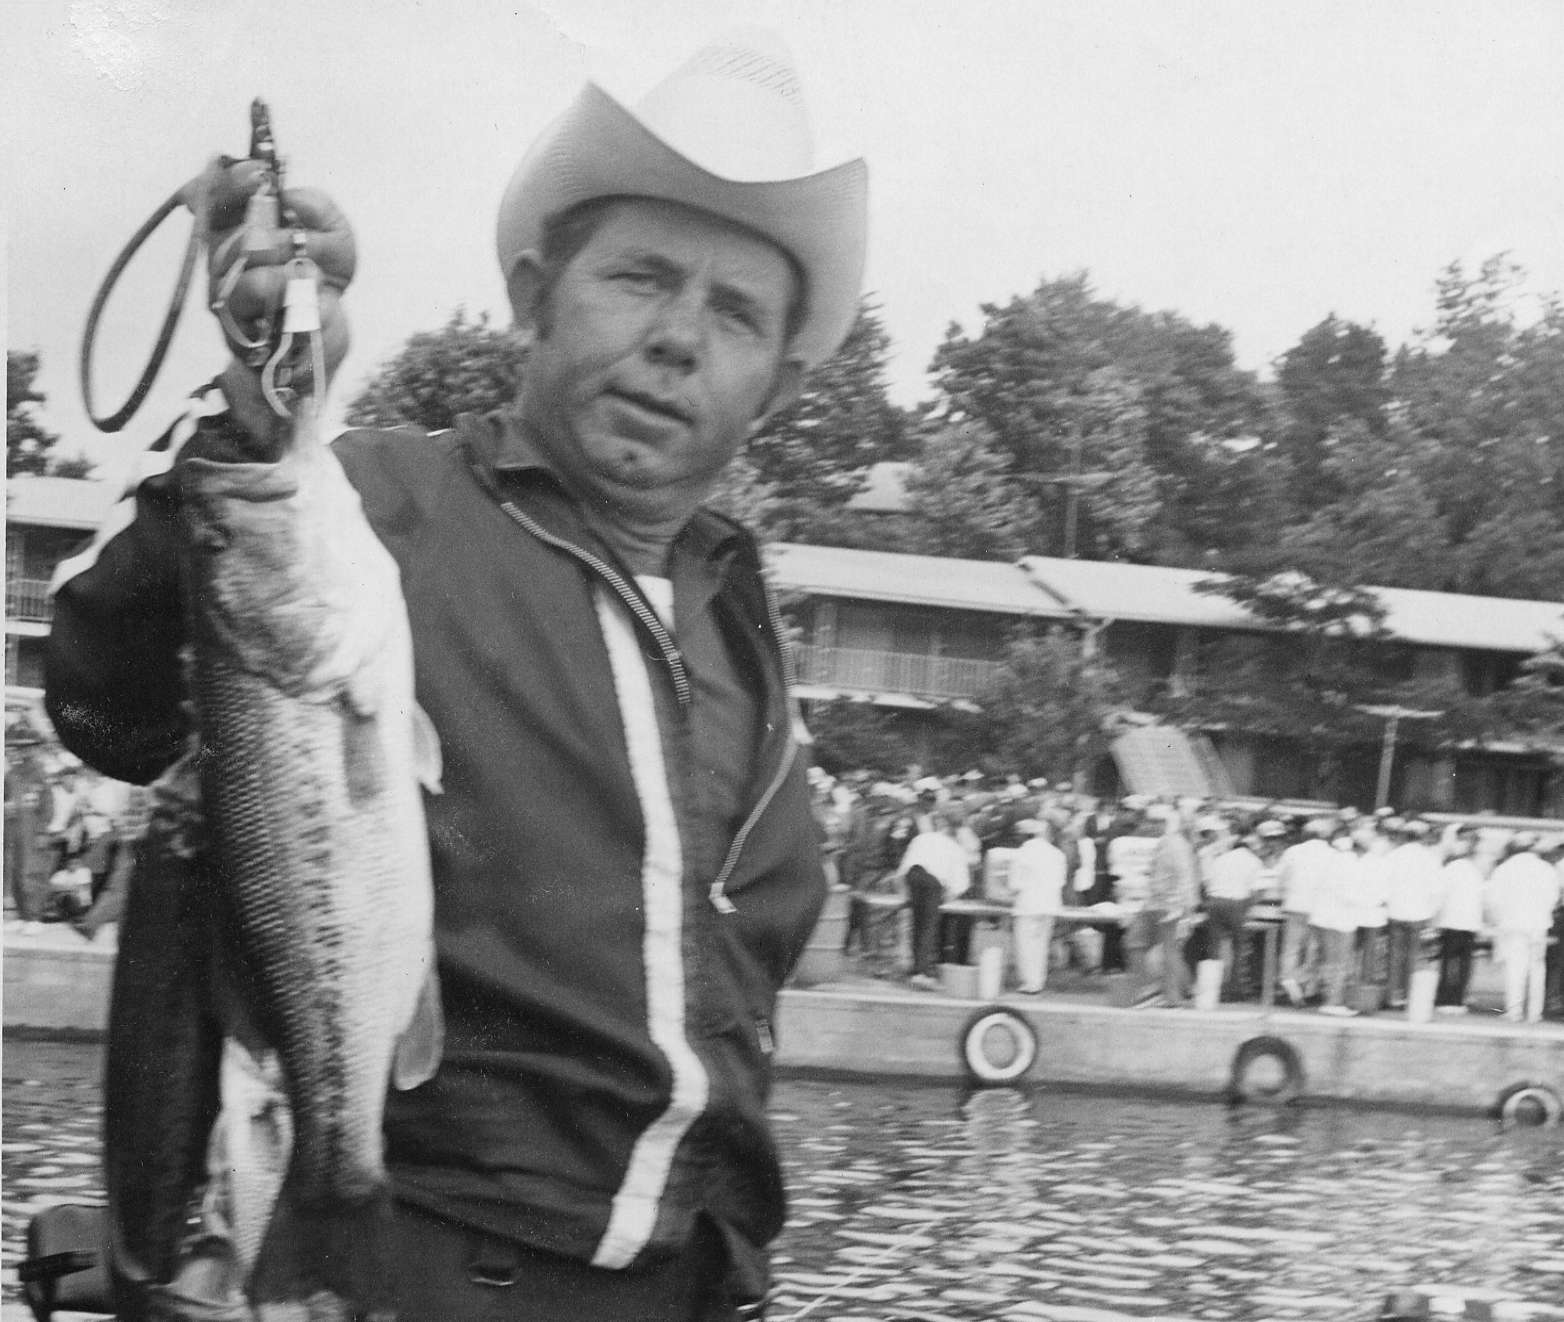 <h4>John Powell</h4><BR>
Powell was one of the first bass fishermen to gain industry sponsorship Creme Lures signed him in 1967, prior to the Dixie Invitational â Ray Scott's second tournament. The following year, he rewarded Creme by using Shimmy Gal worms to catch 132 pounds, 12 ounces from Lake Eufaula, Ala. Powell was one of the sport's first stars and became a popular seminar speaker.
